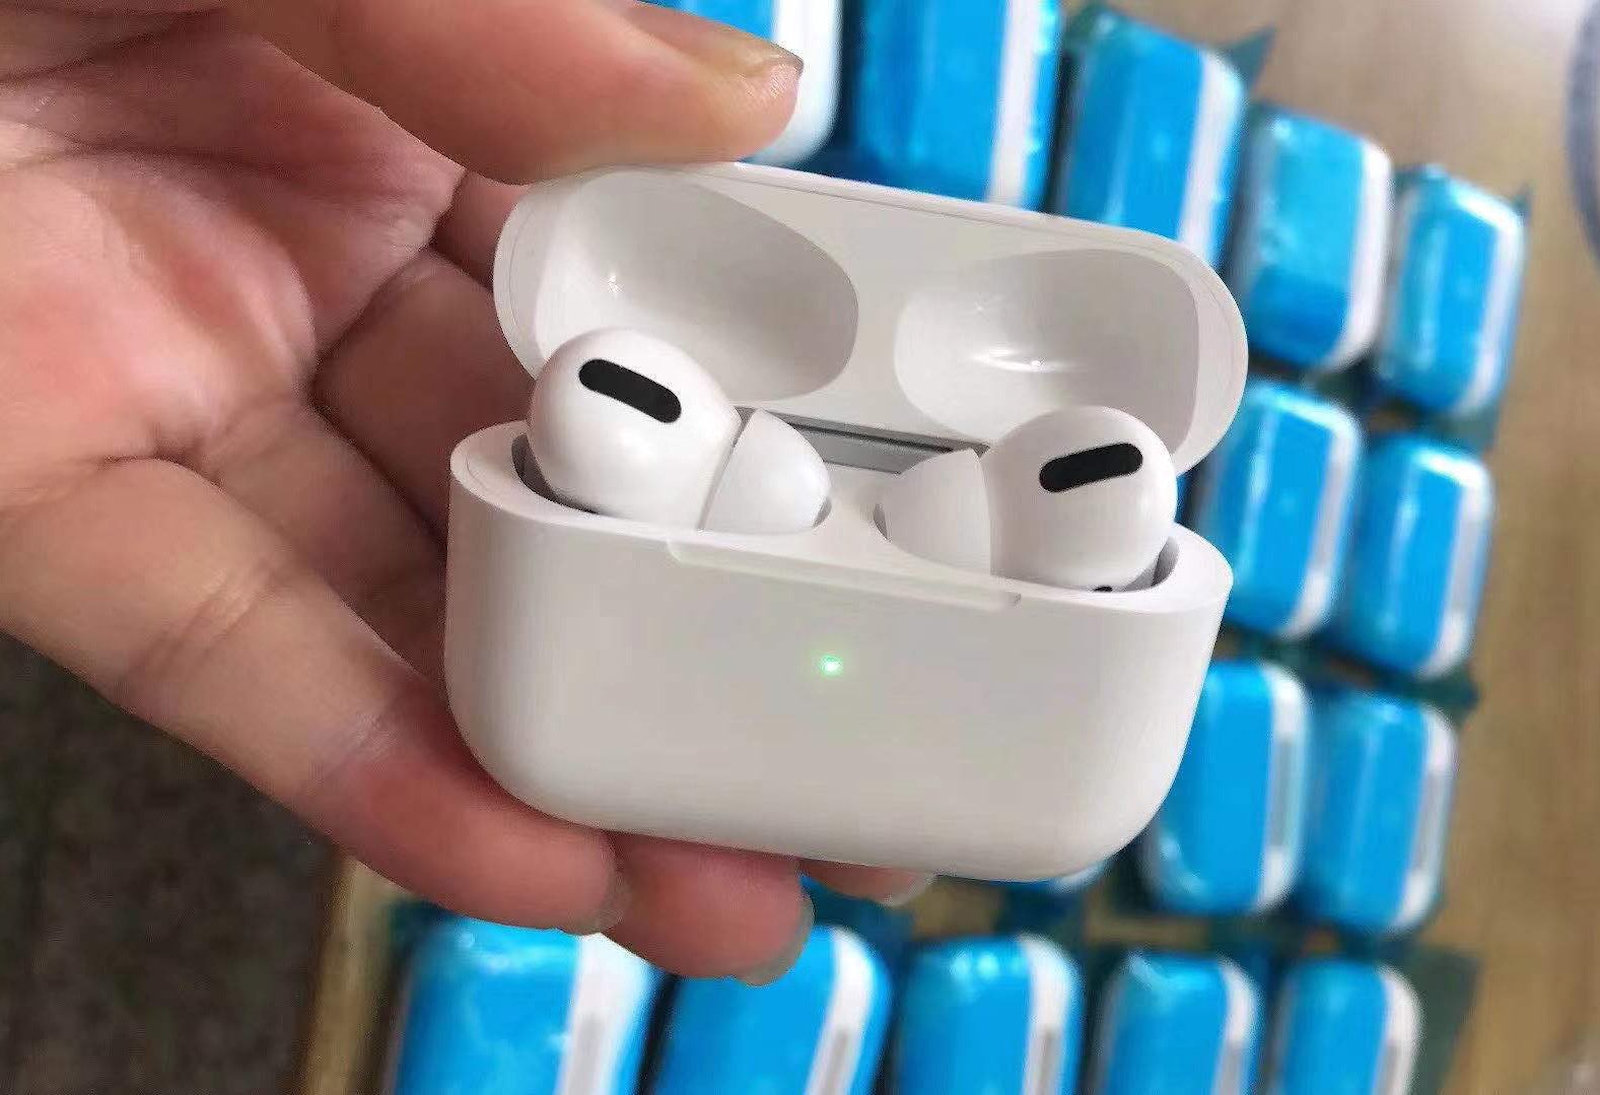 Iphone airpods 1. Наушники Air pods Pro 2. Air pods Pro 1. Наушники Apple аирподс 3. Клон AIRPODS 2.